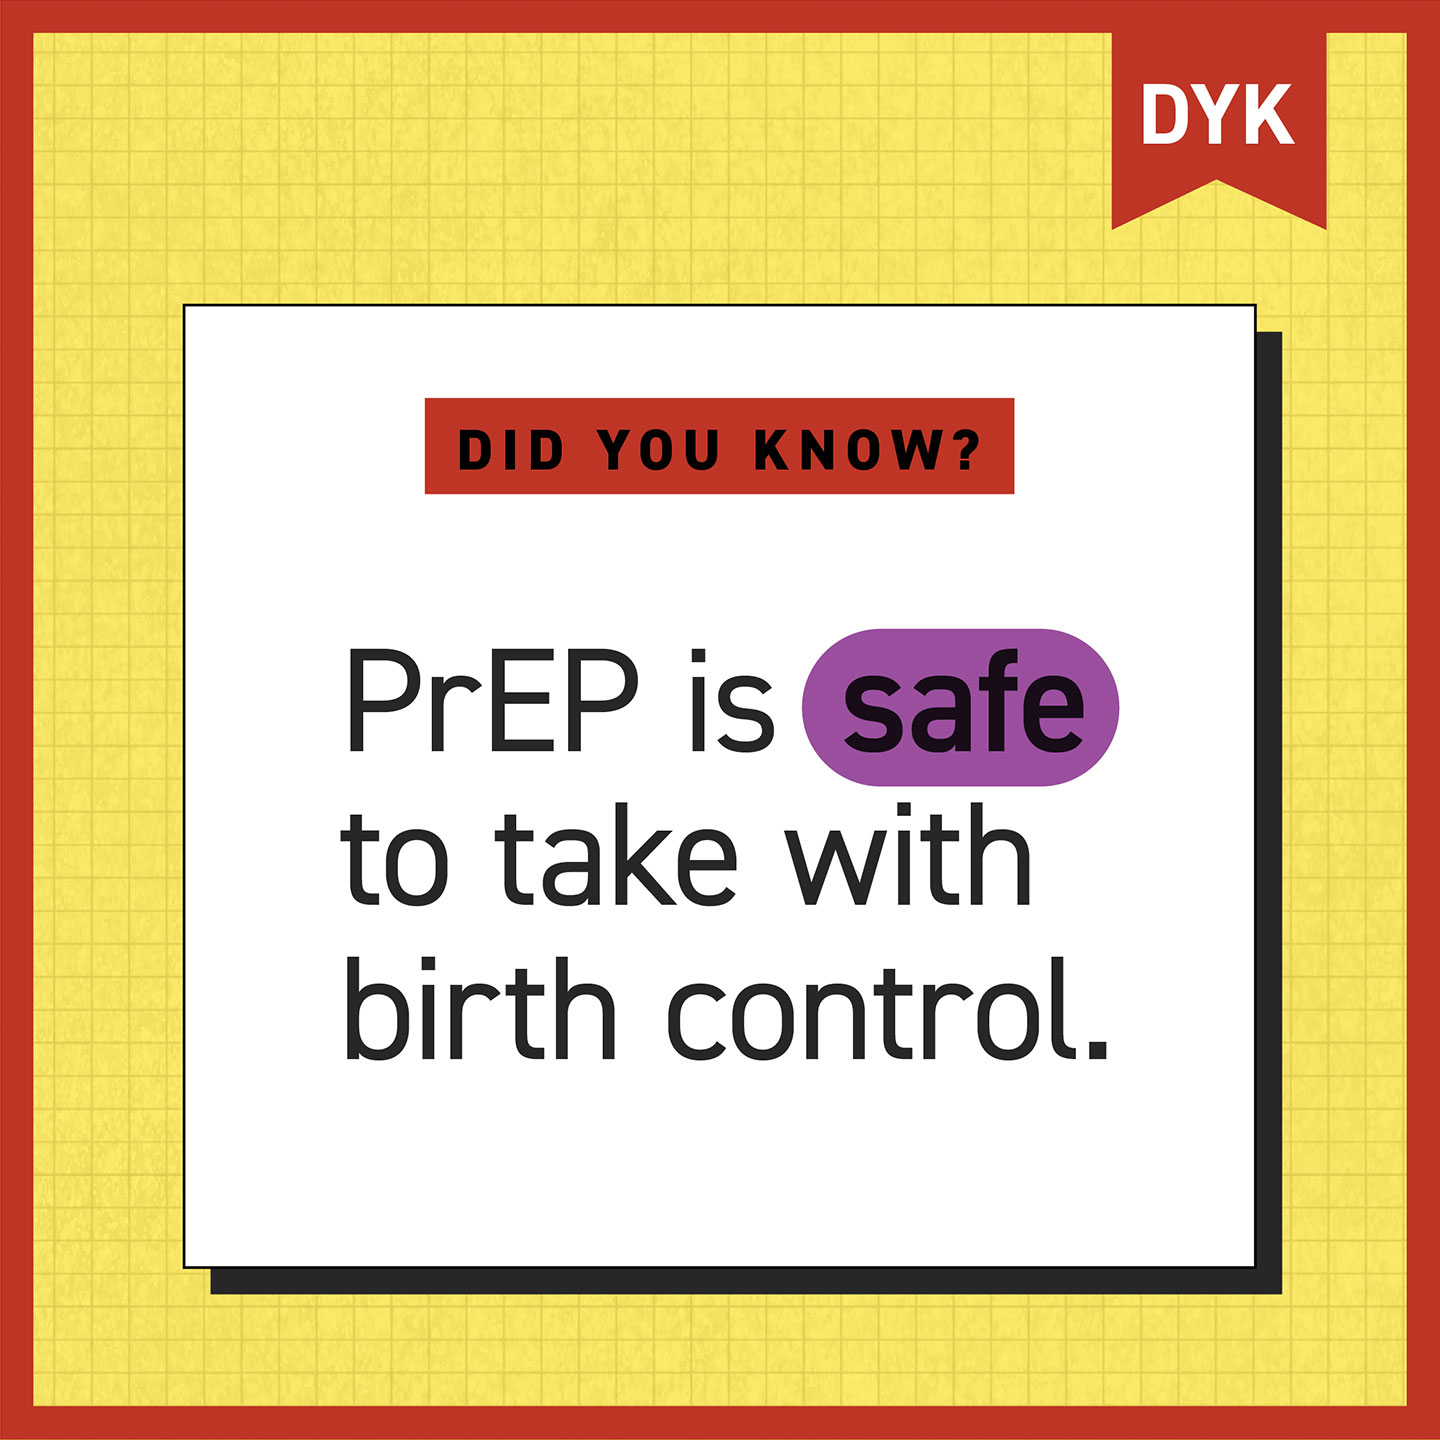 Did you know? PrEP is safe to take with birth control.